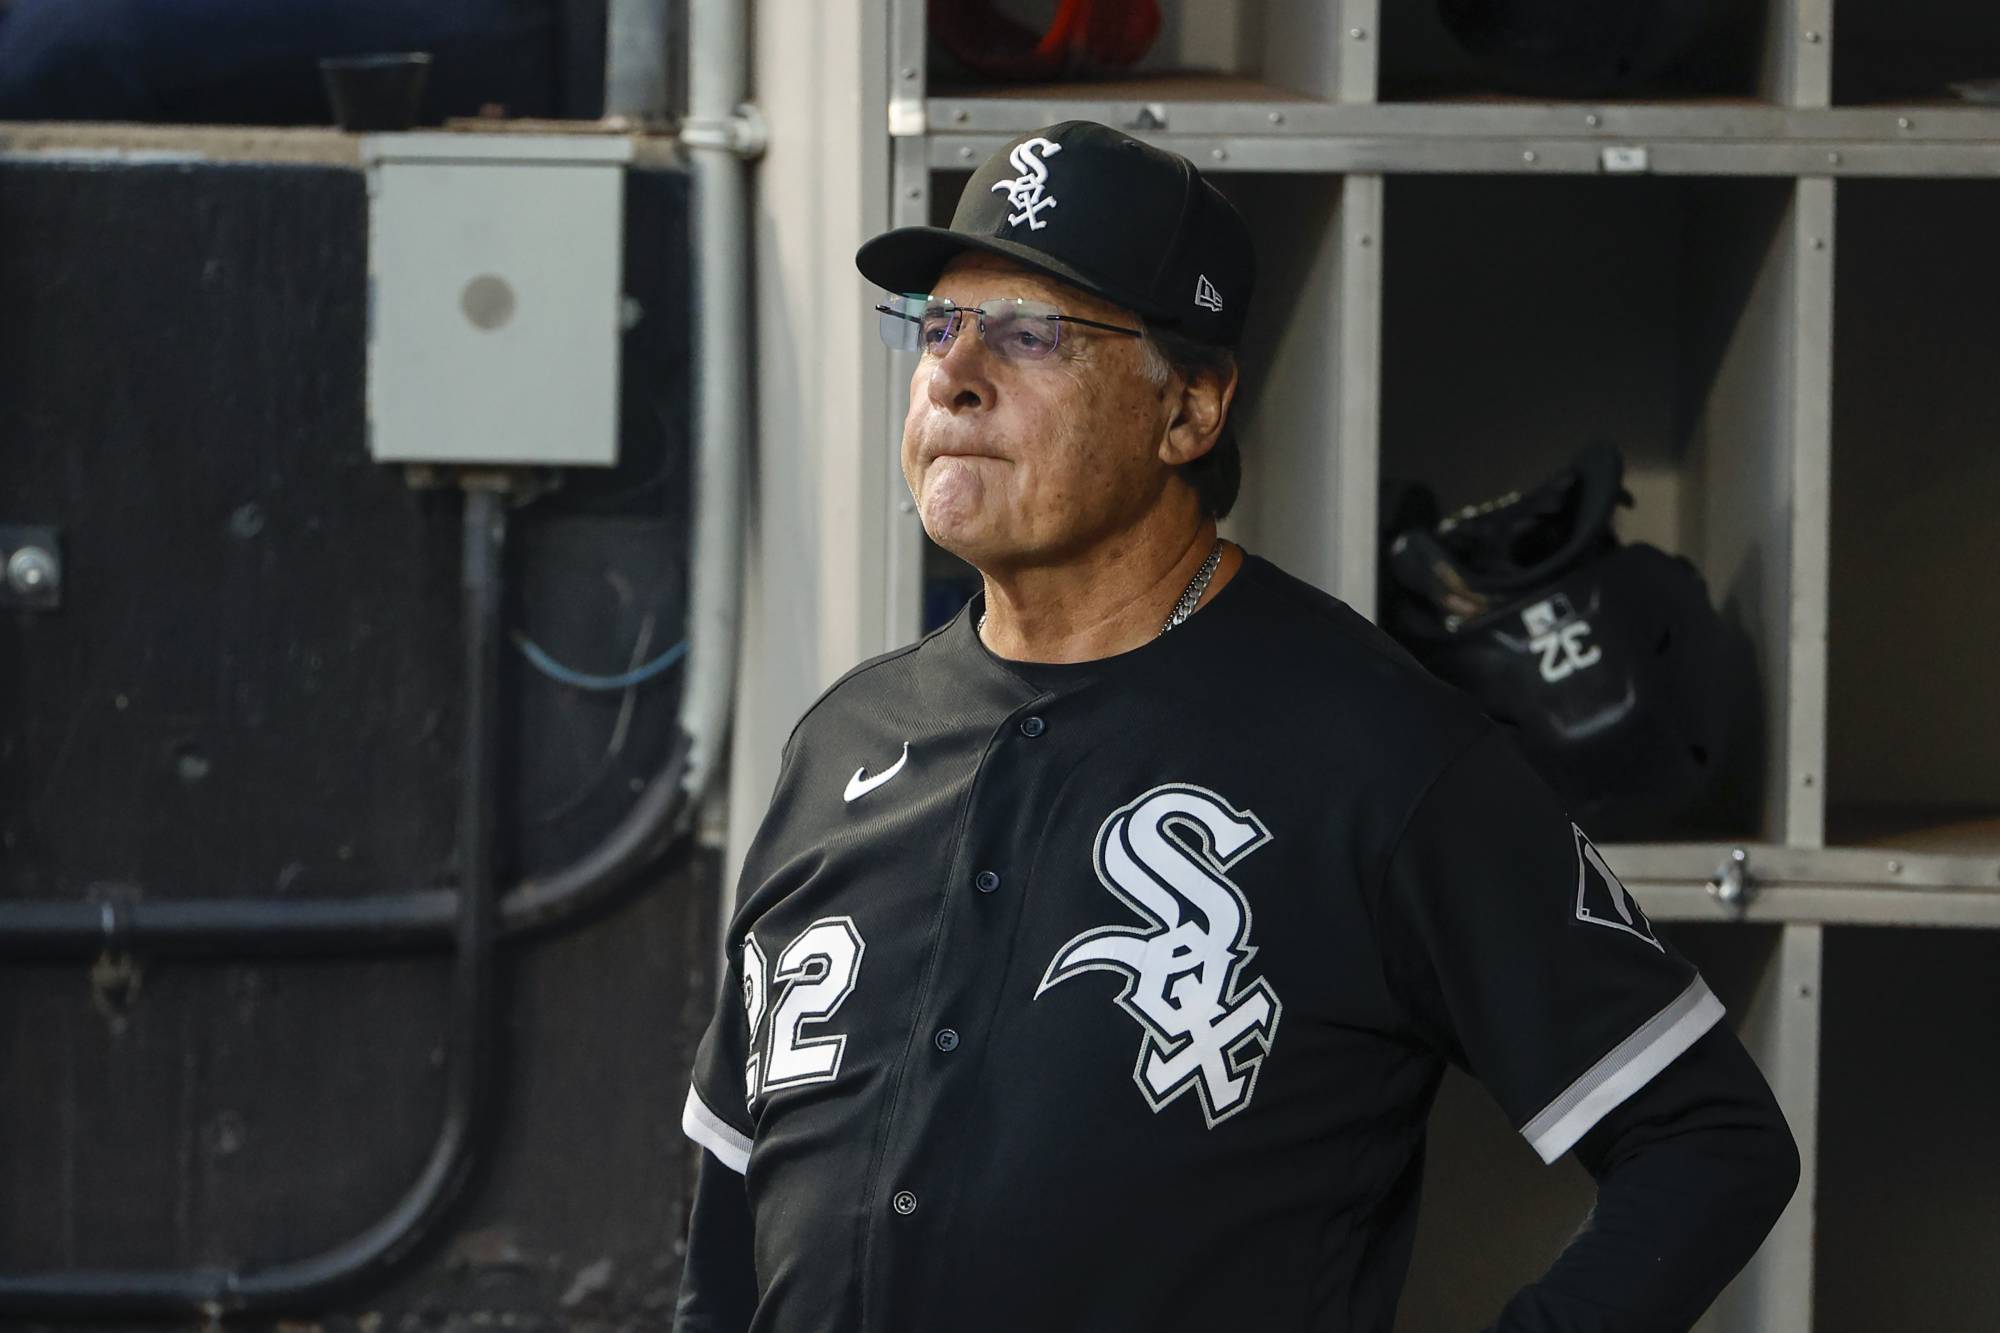 Tony La Russa will not return to White Sox this season - The Japan Times